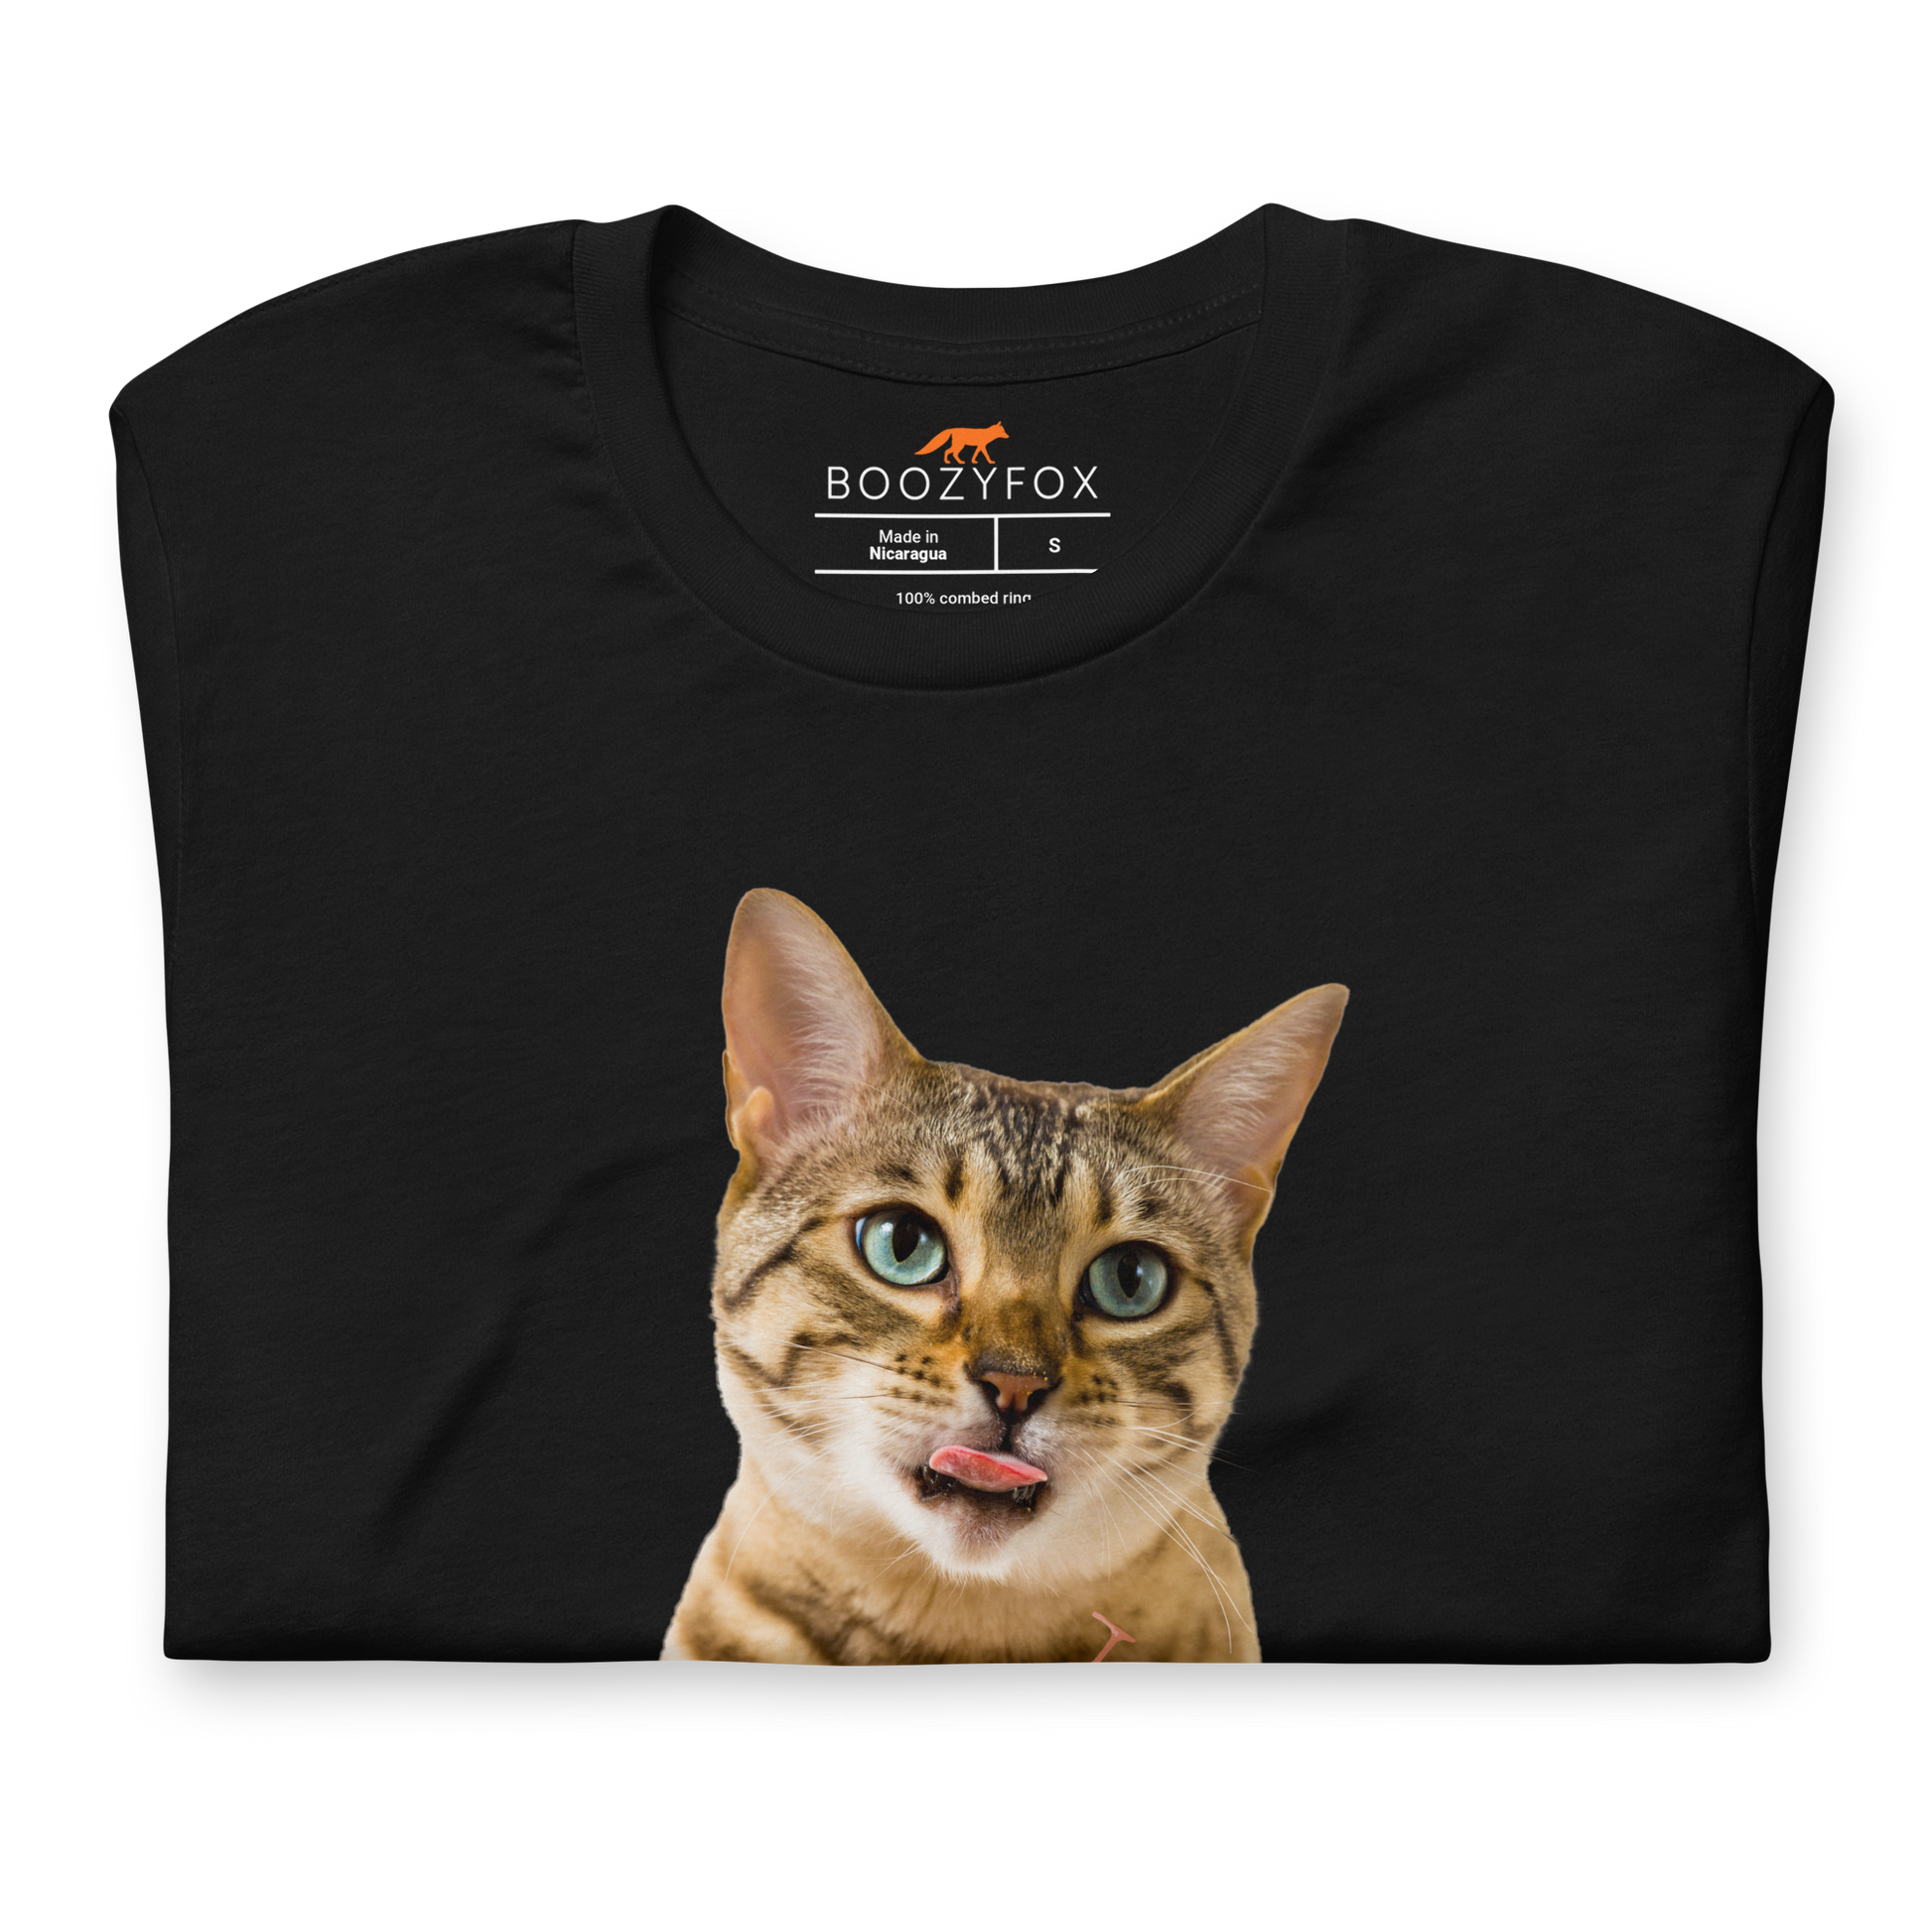 Front Details of a Black Premium Cat T-Shirt featuring a Purrfect graphic on the chest - Funny Graphic Cat Tees - Boozy Fox